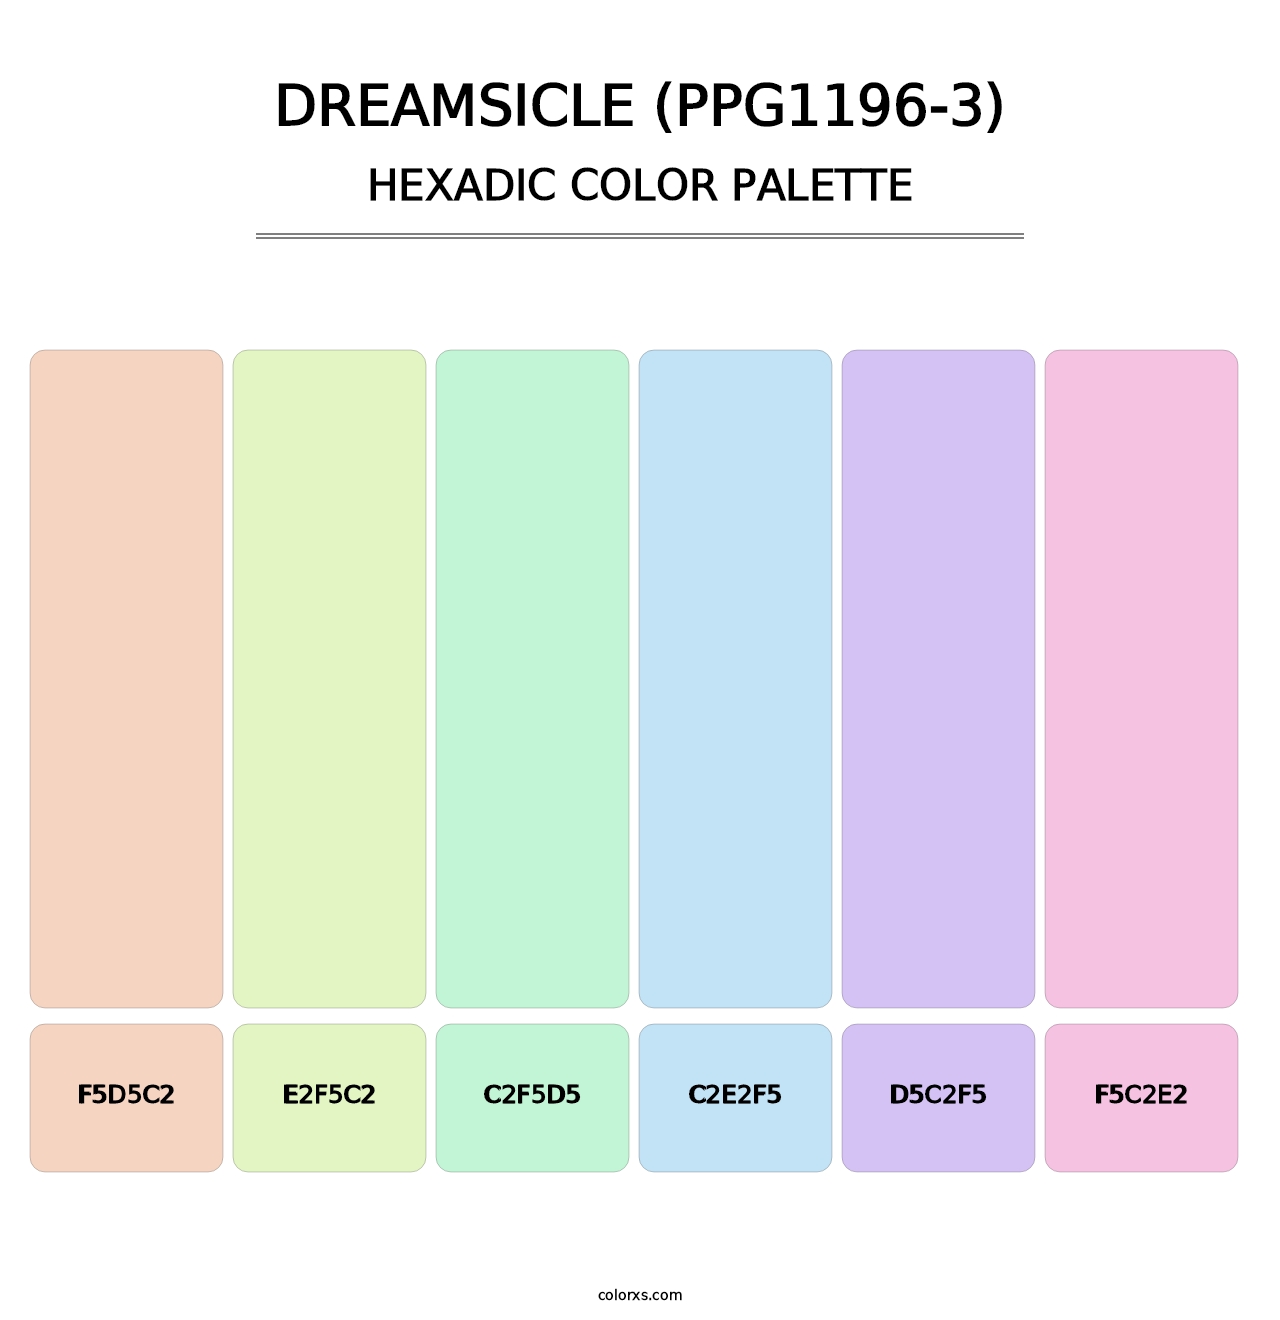 Dreamsicle (PPG1196-3) - Hexadic Color Palette